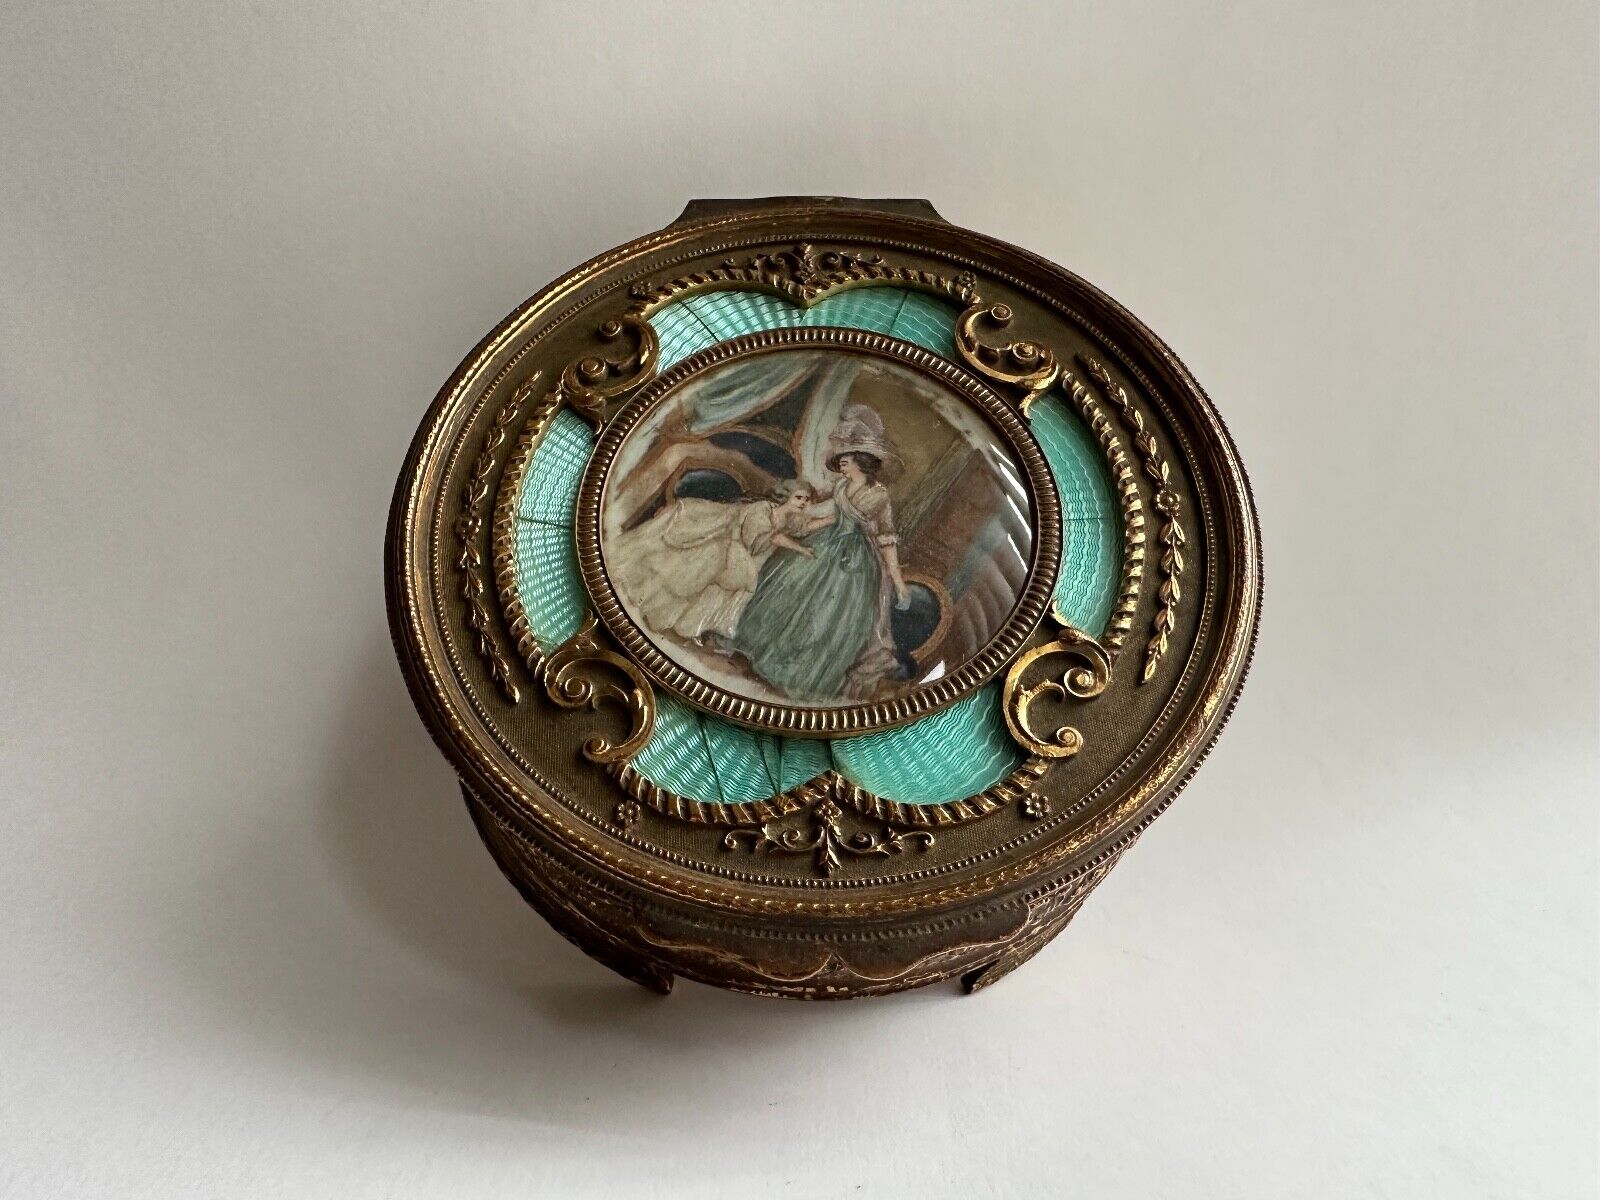 Antique French Bronze Guiloche Enamel Trinket Jewelry Box, Hand Painting